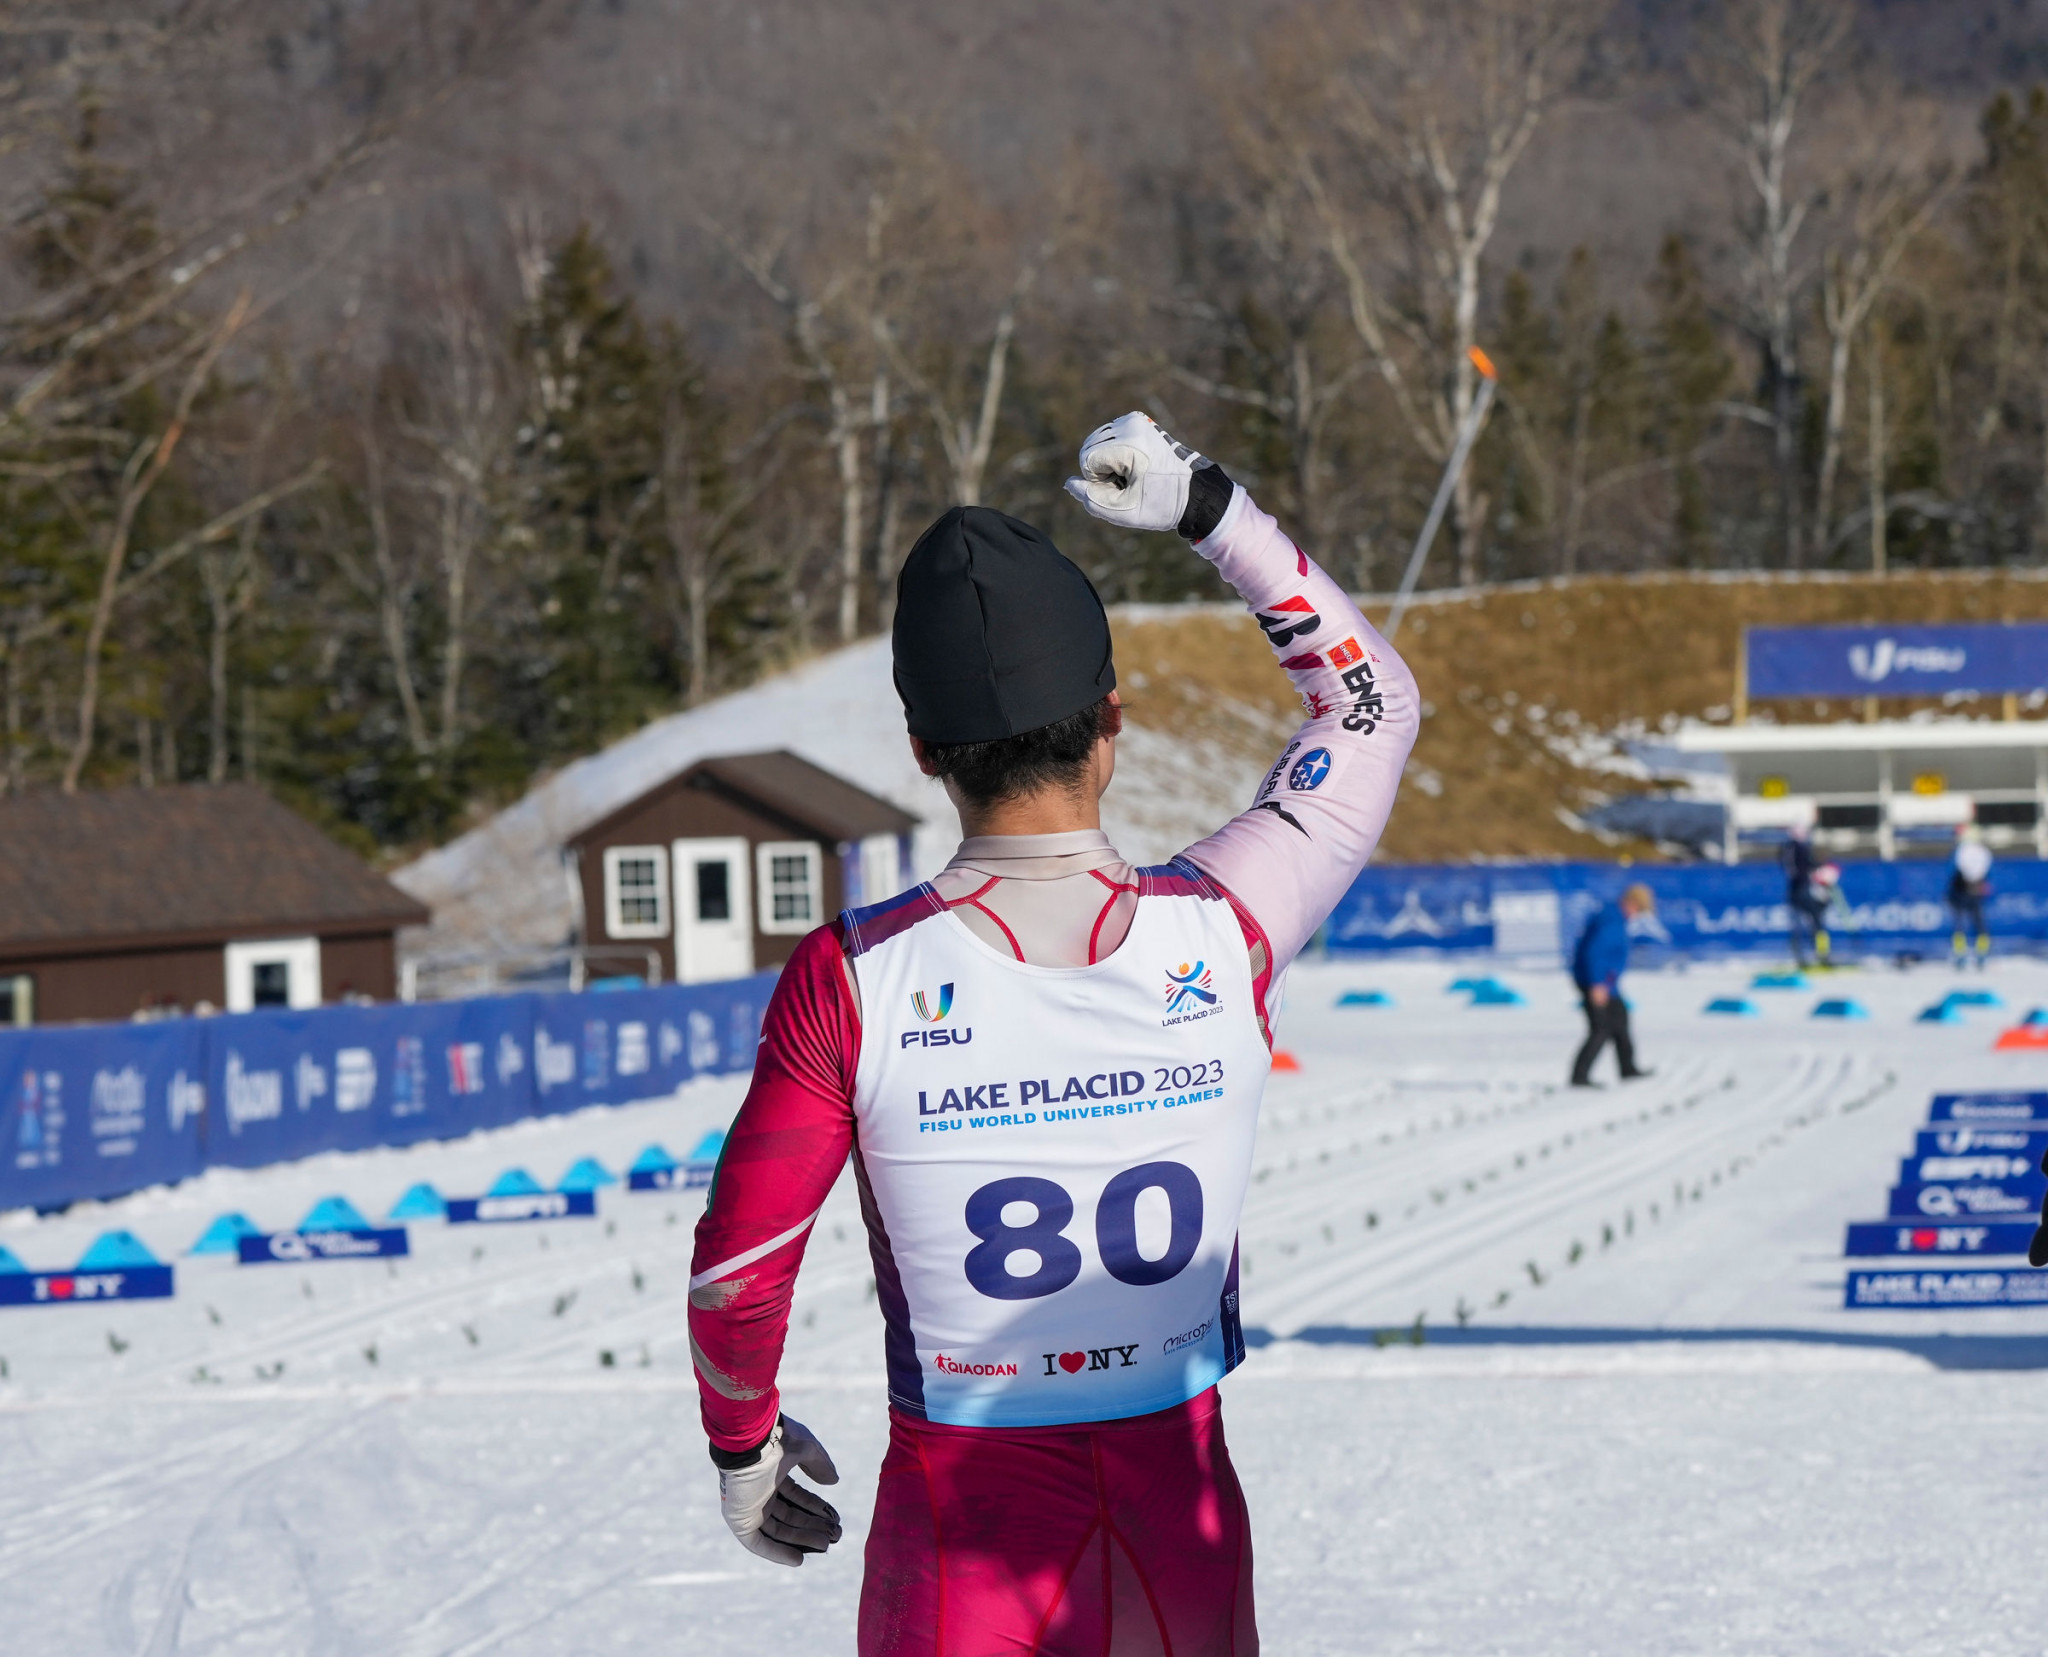 Japan's Ryo Hirose won his second gold medal event of the Games in the men's 10km individual cross-country classic ©FISU